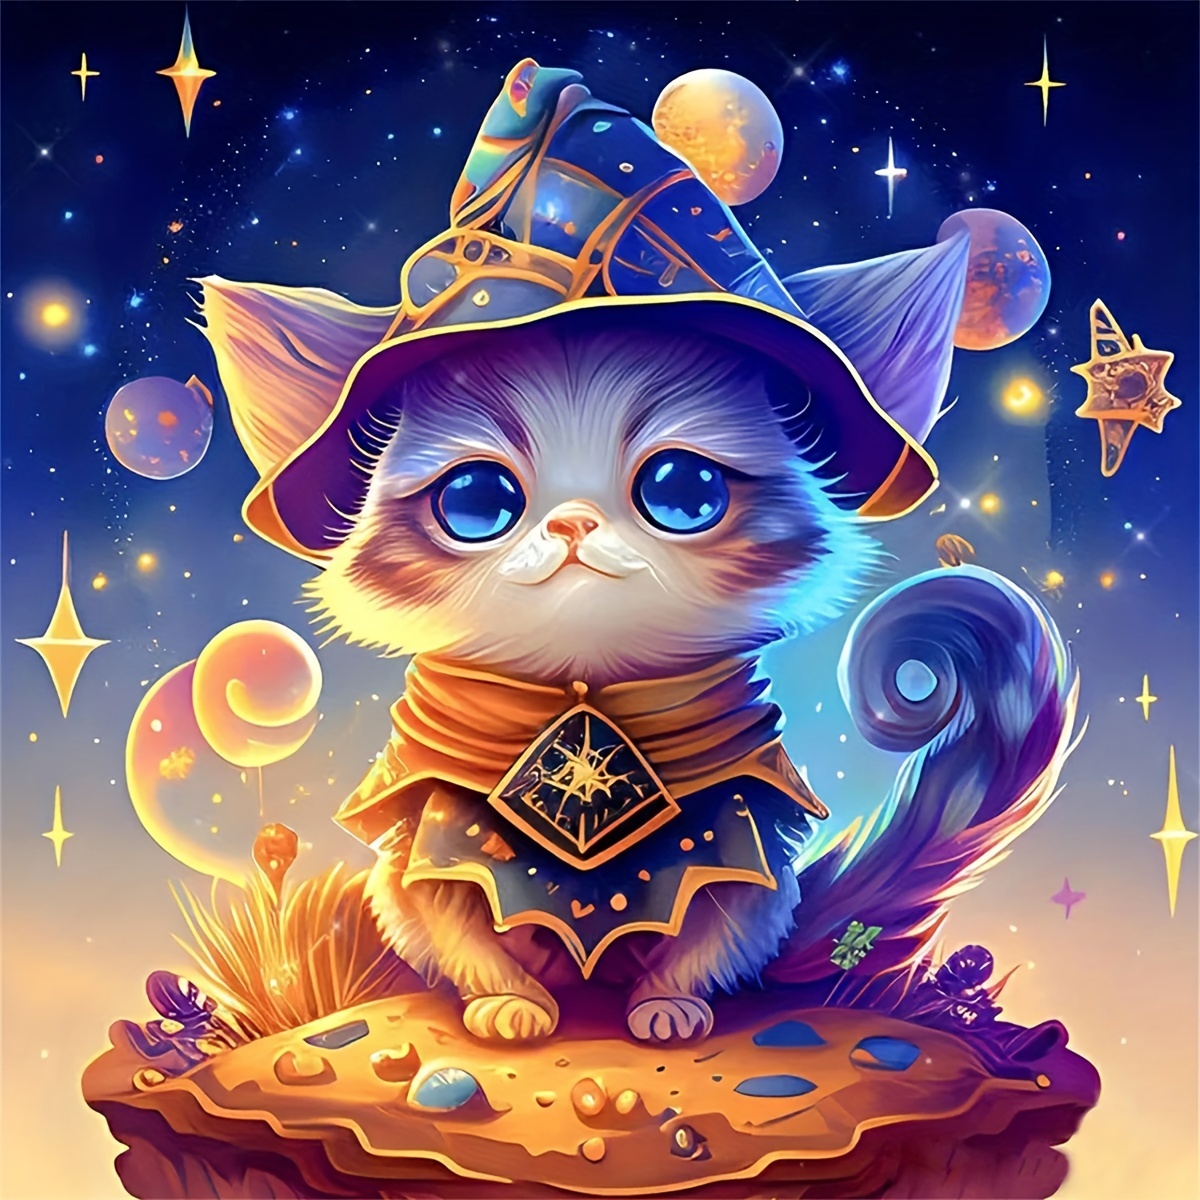 1pc DIY Artificial Diamond Painting 7.9 * 7.9 Inch/20*20cm Cartoon Magic  Cat Pattern Art Painting Handmade Home Gift (Without Frame)